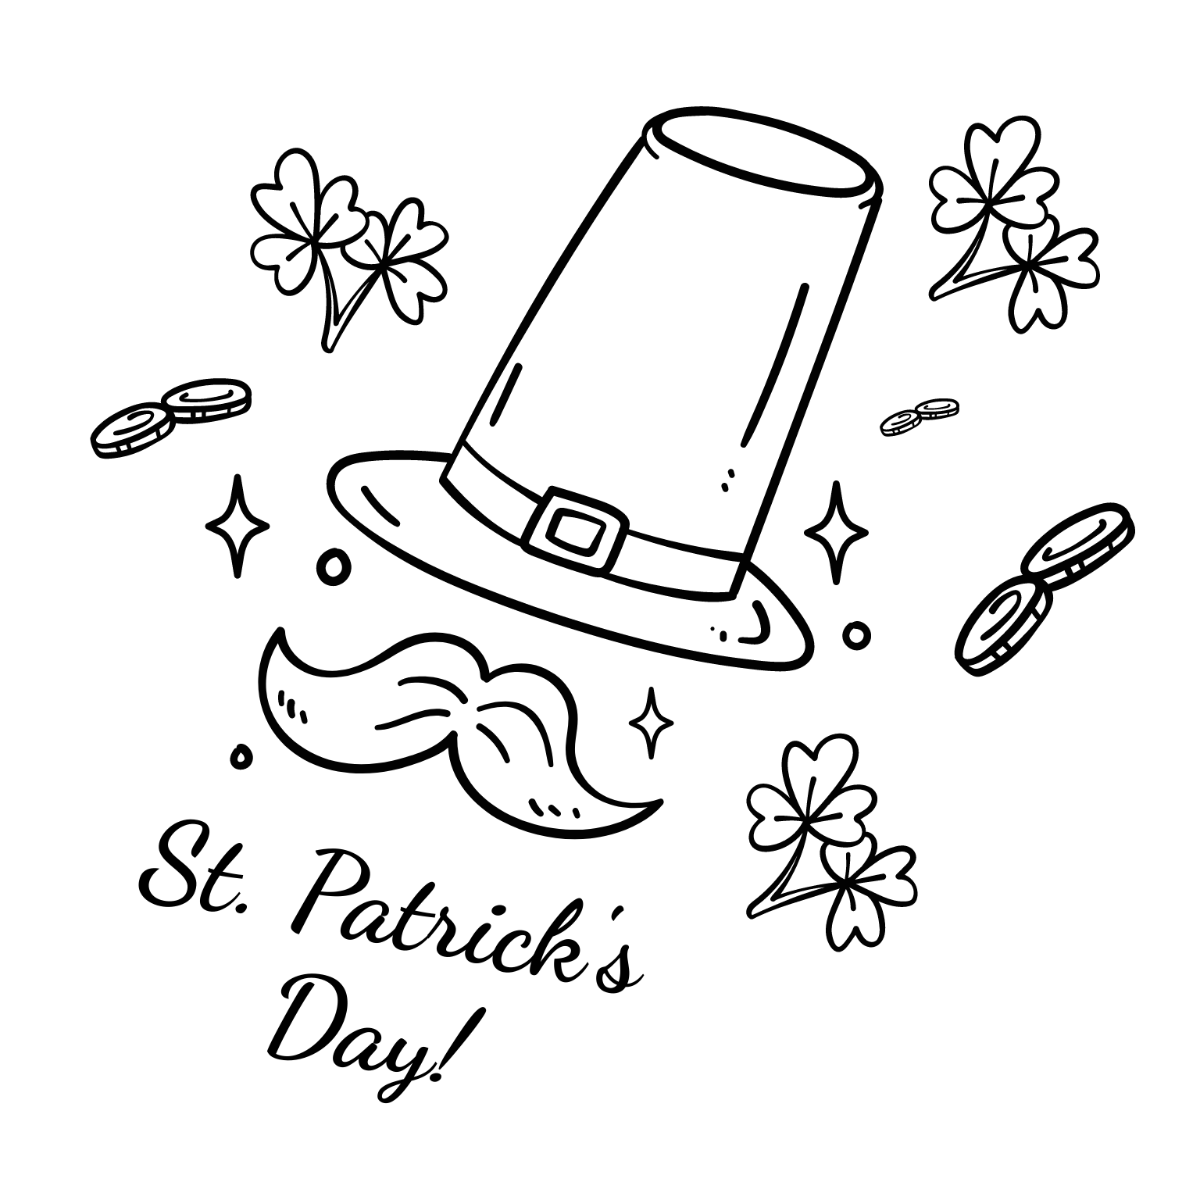 St. Patrick's Day Drawing Template